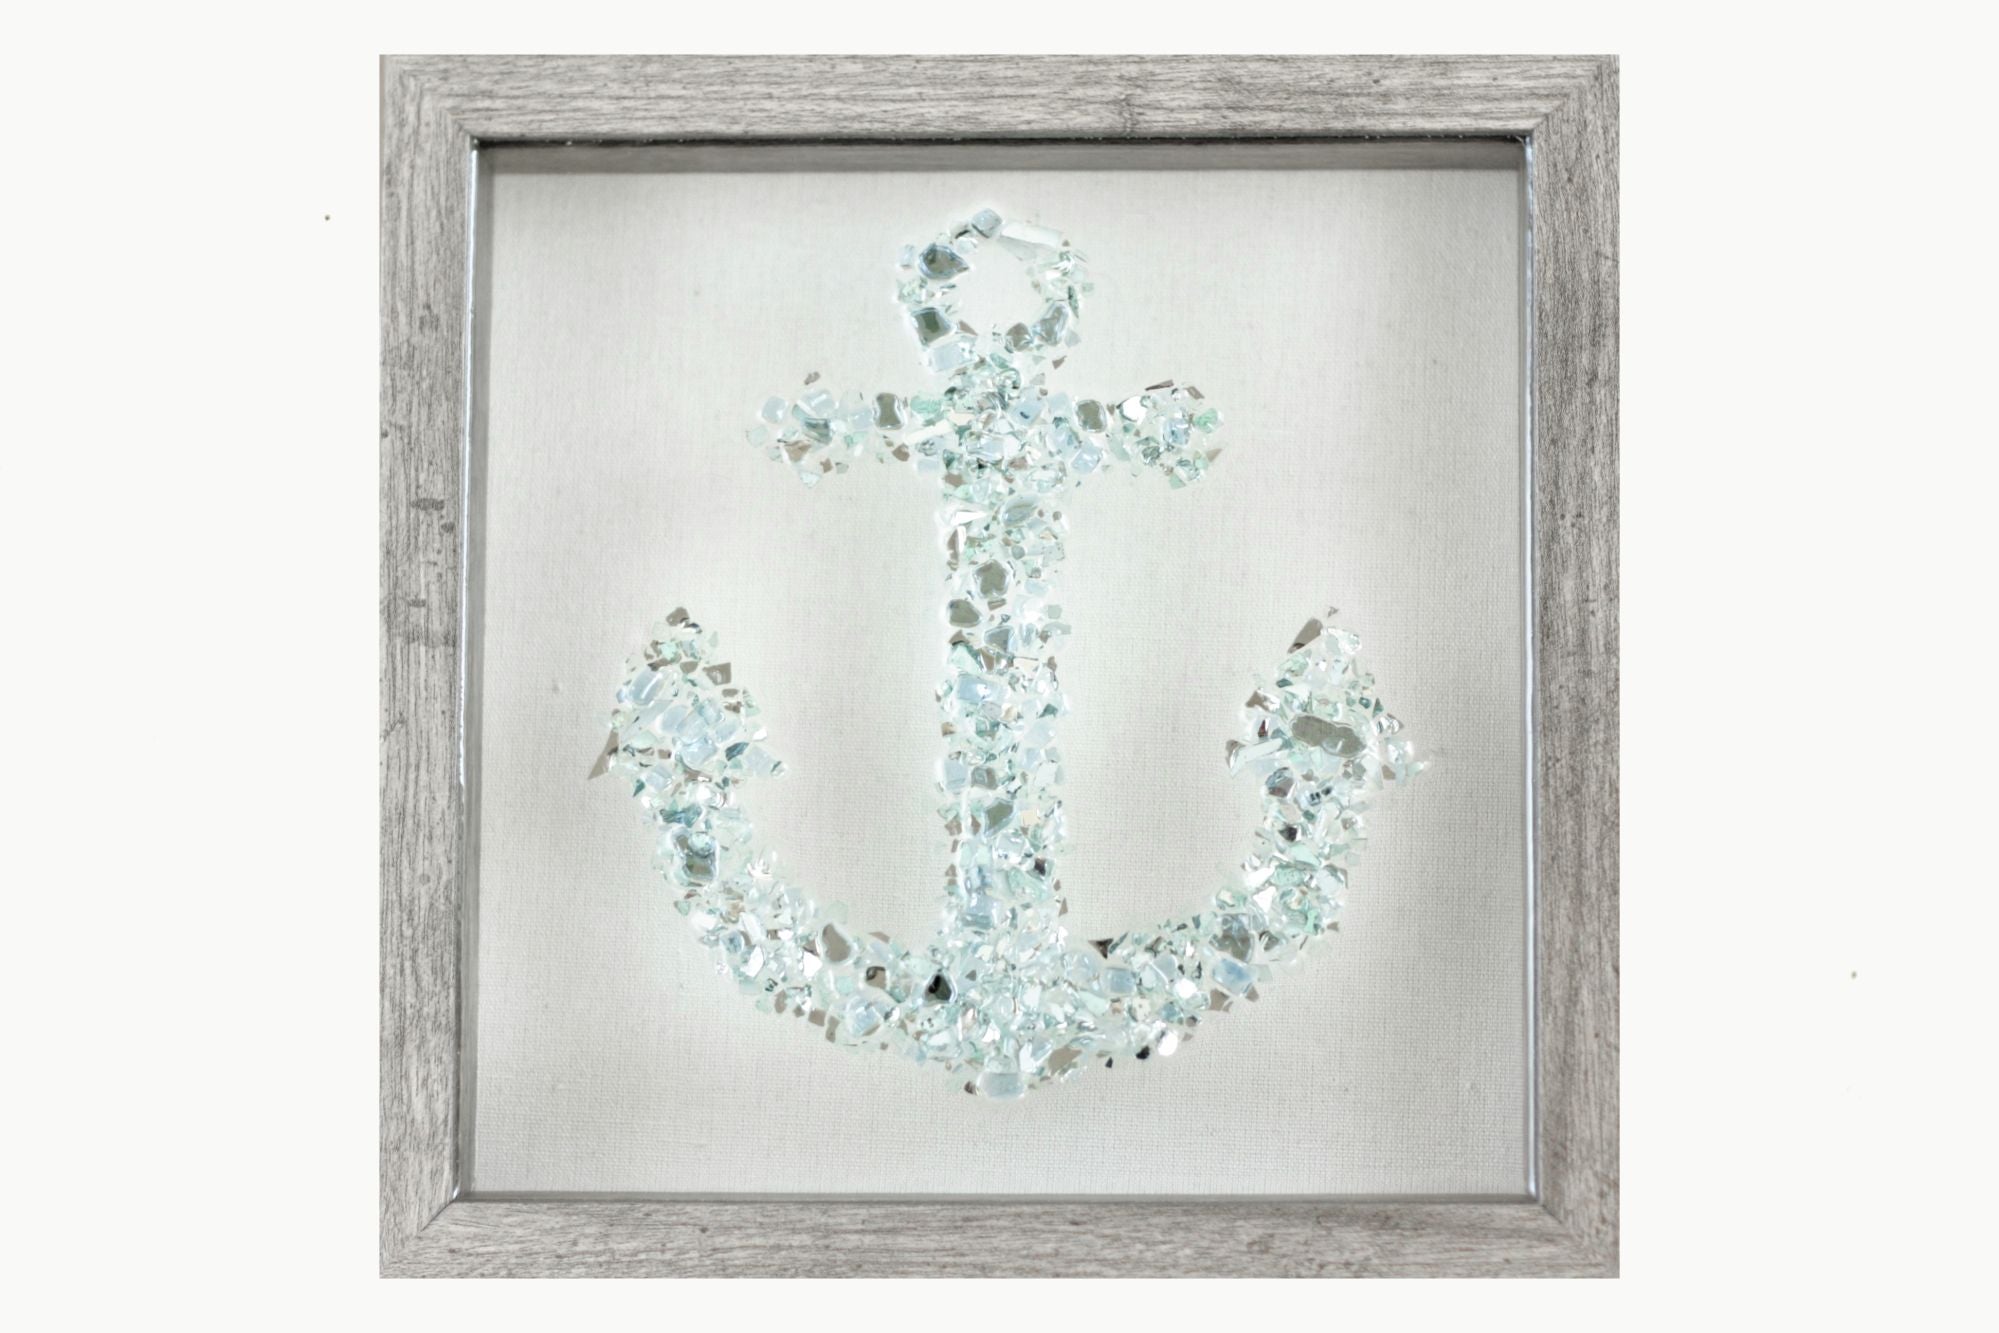 Anchor Sea Glass Resin Art (Turquoise), 10x10